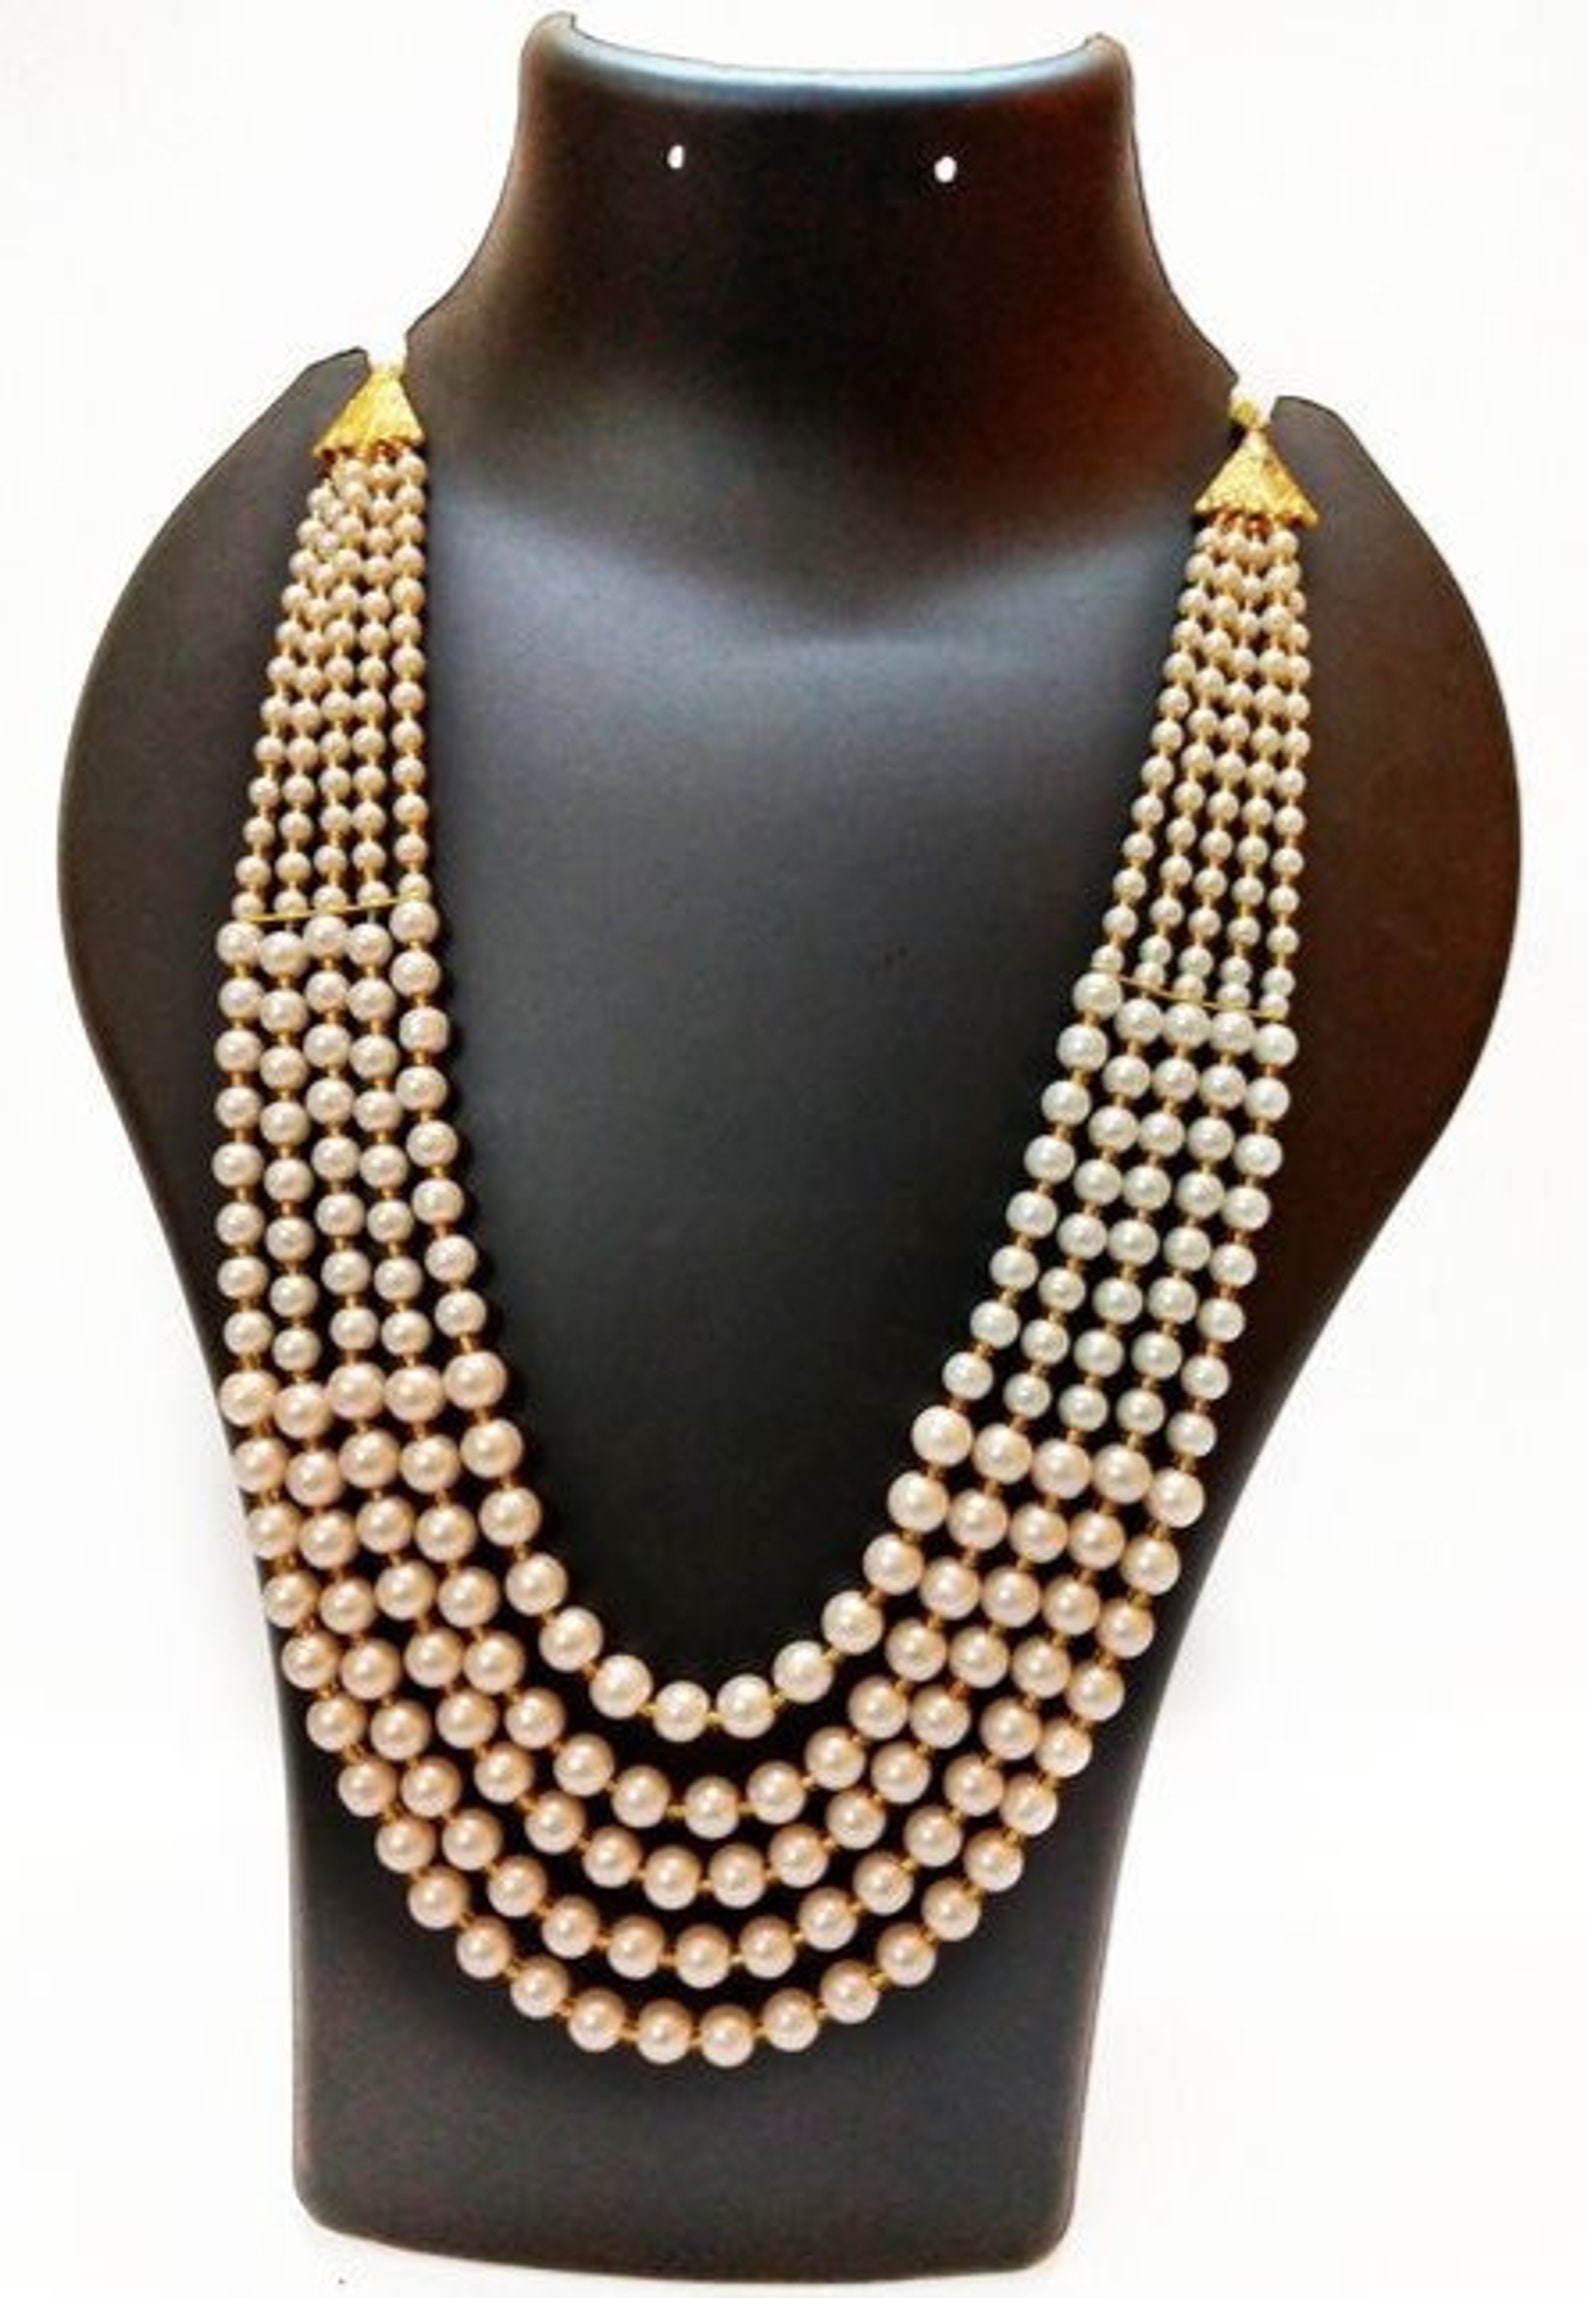 Vintage Pearl Beads Necklace With White Moti Mala Strand 5 - Etsy